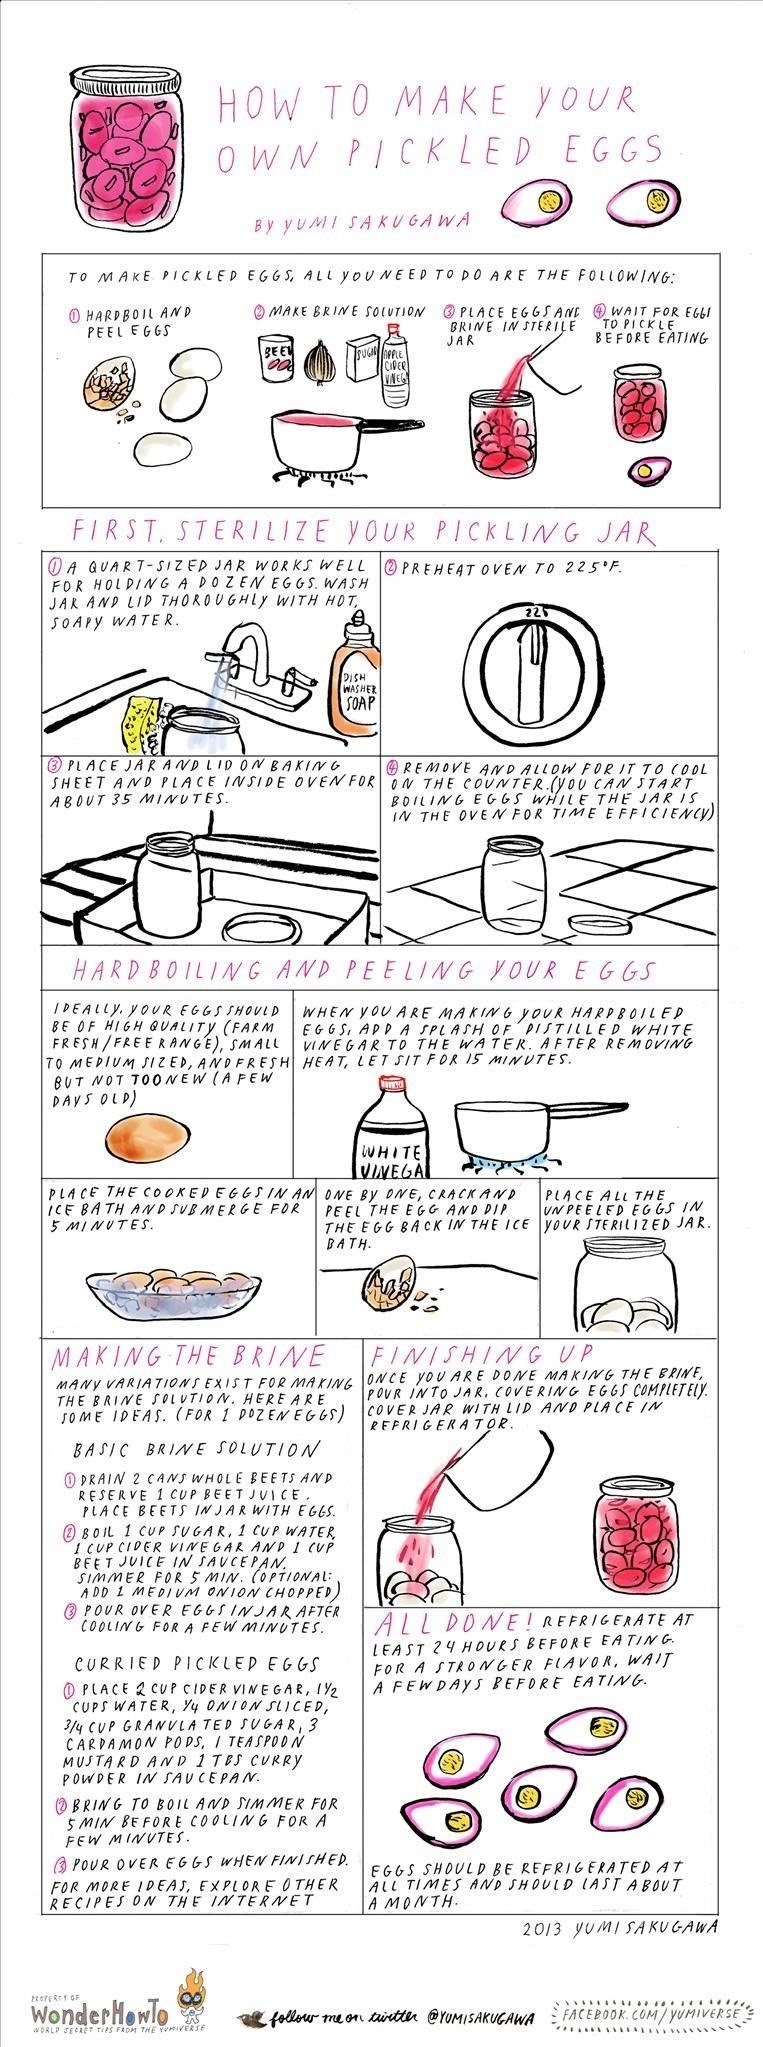 Eggs Expiring Soon? Make These Pickled Eggs in a Jar & Enjoy Them Later